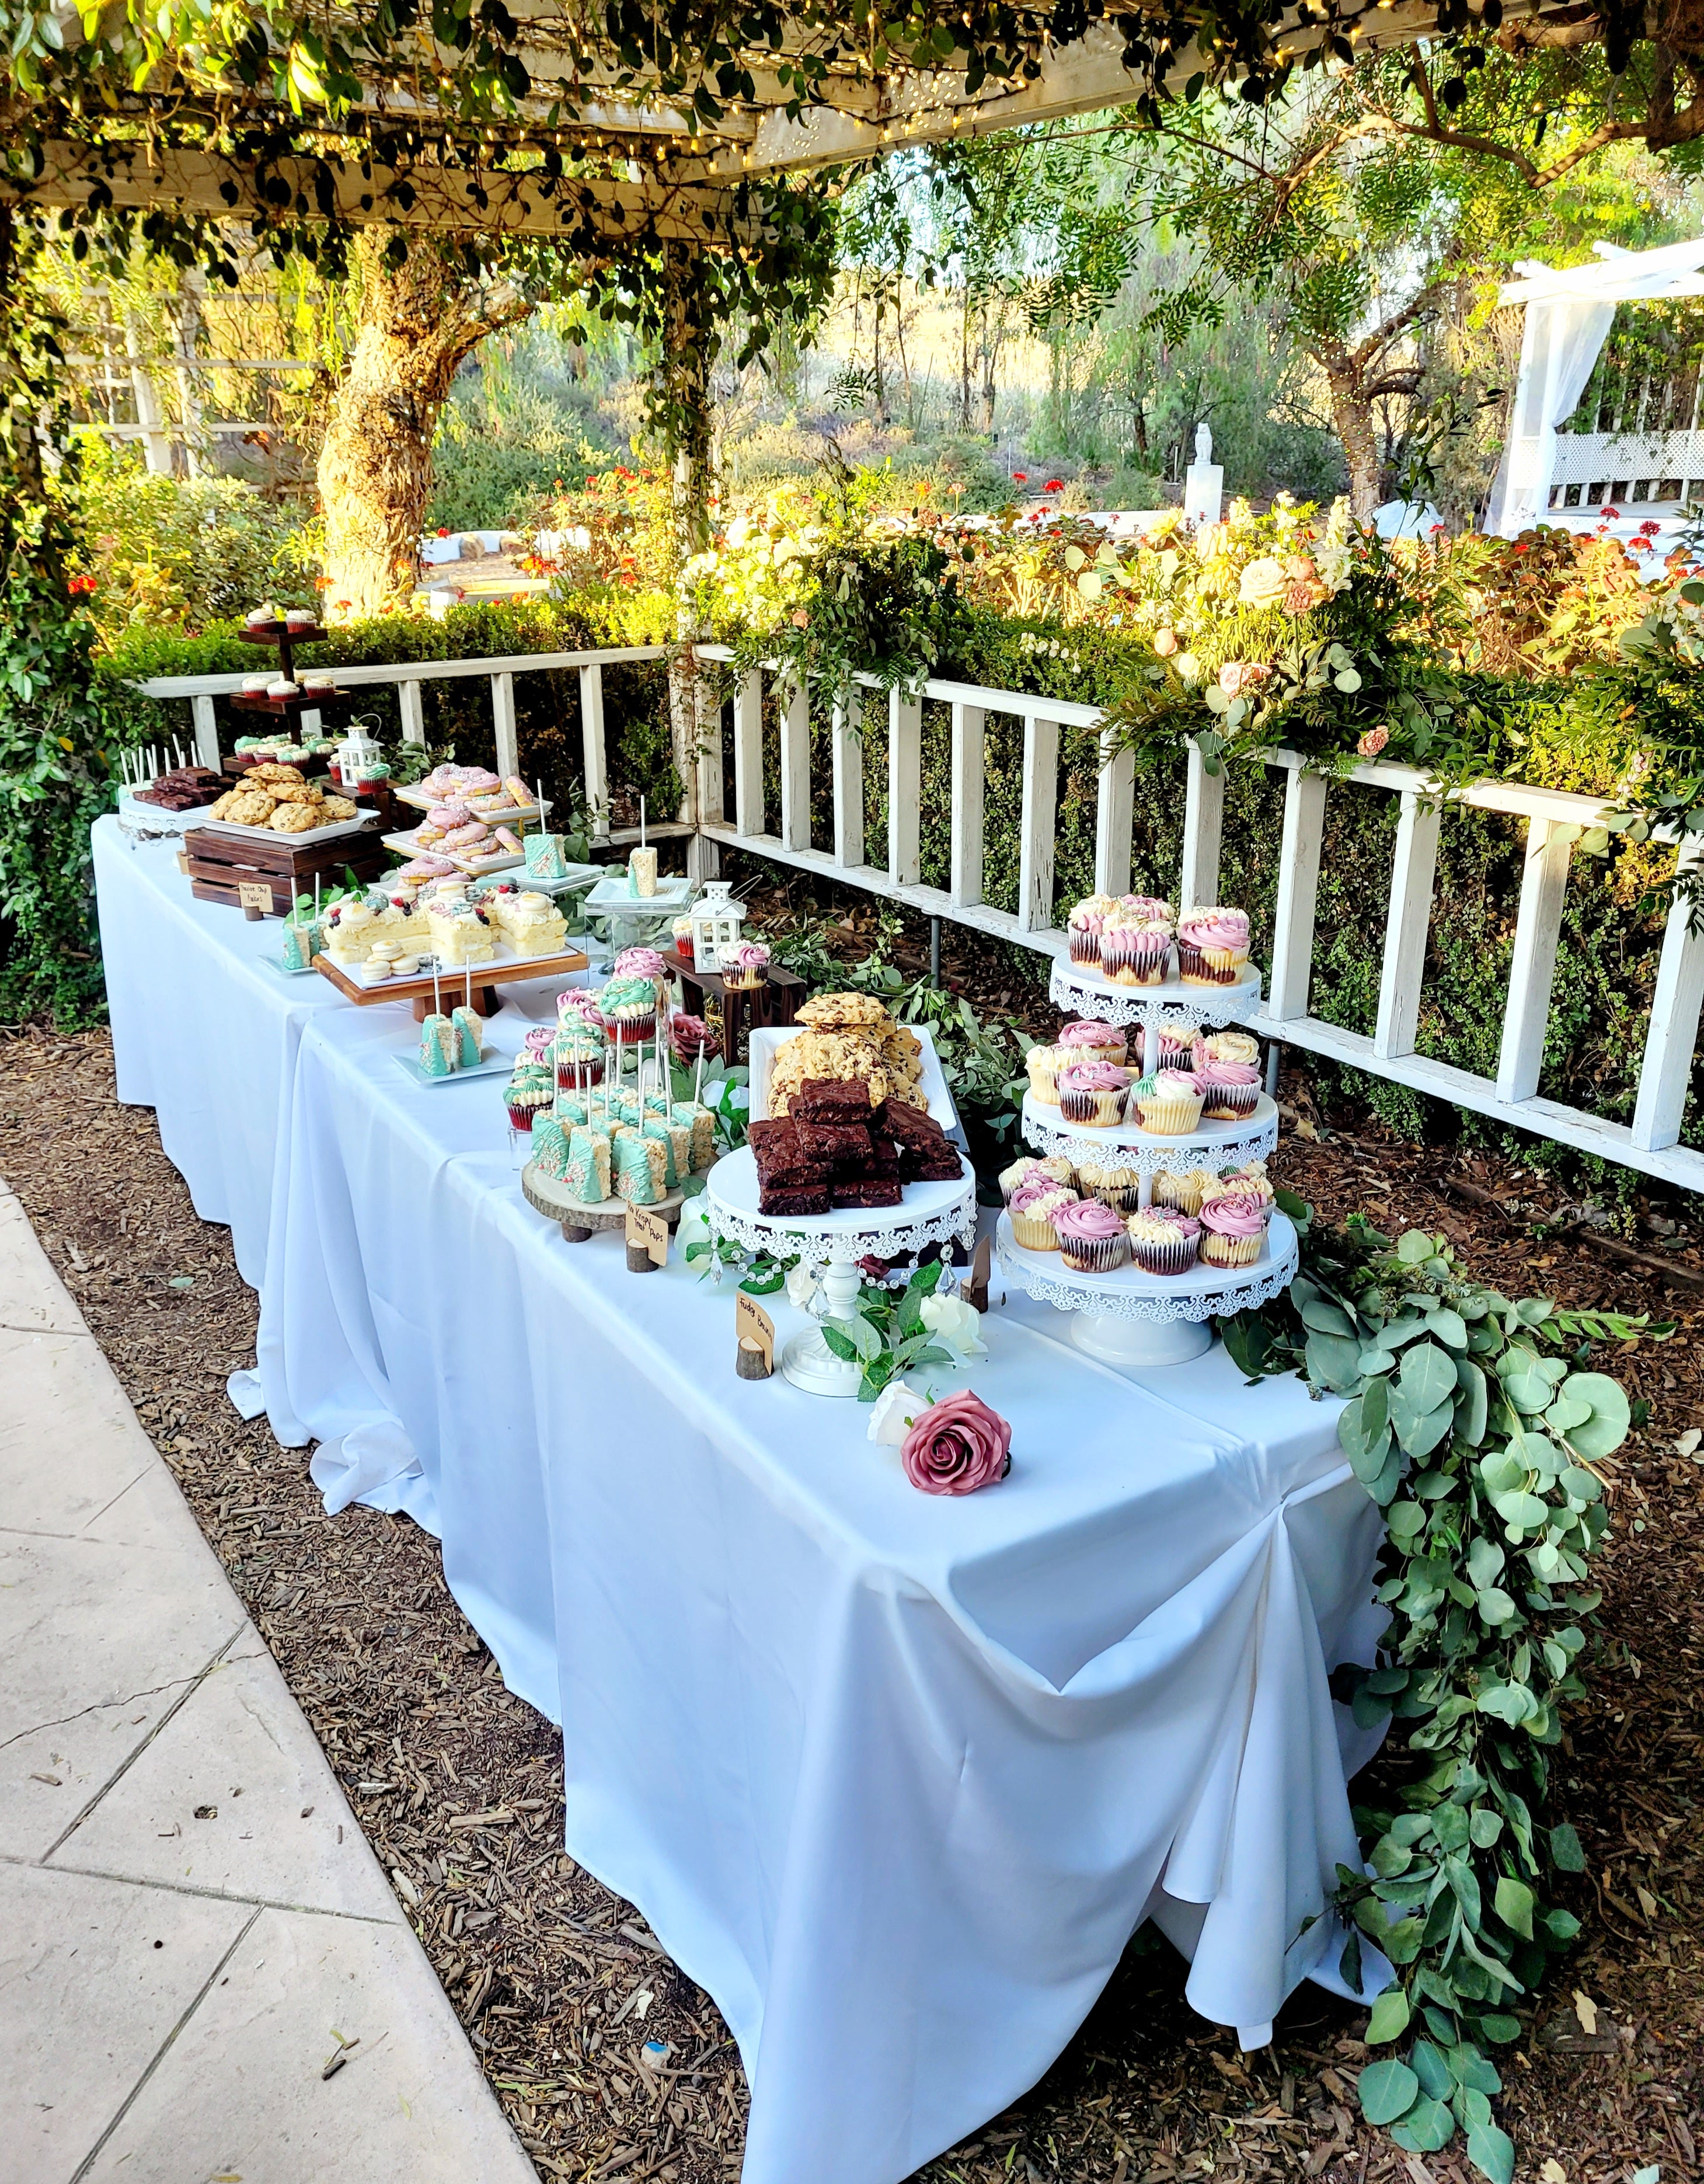 An outdoor wedding dessert table. Rustic with wooden accents.